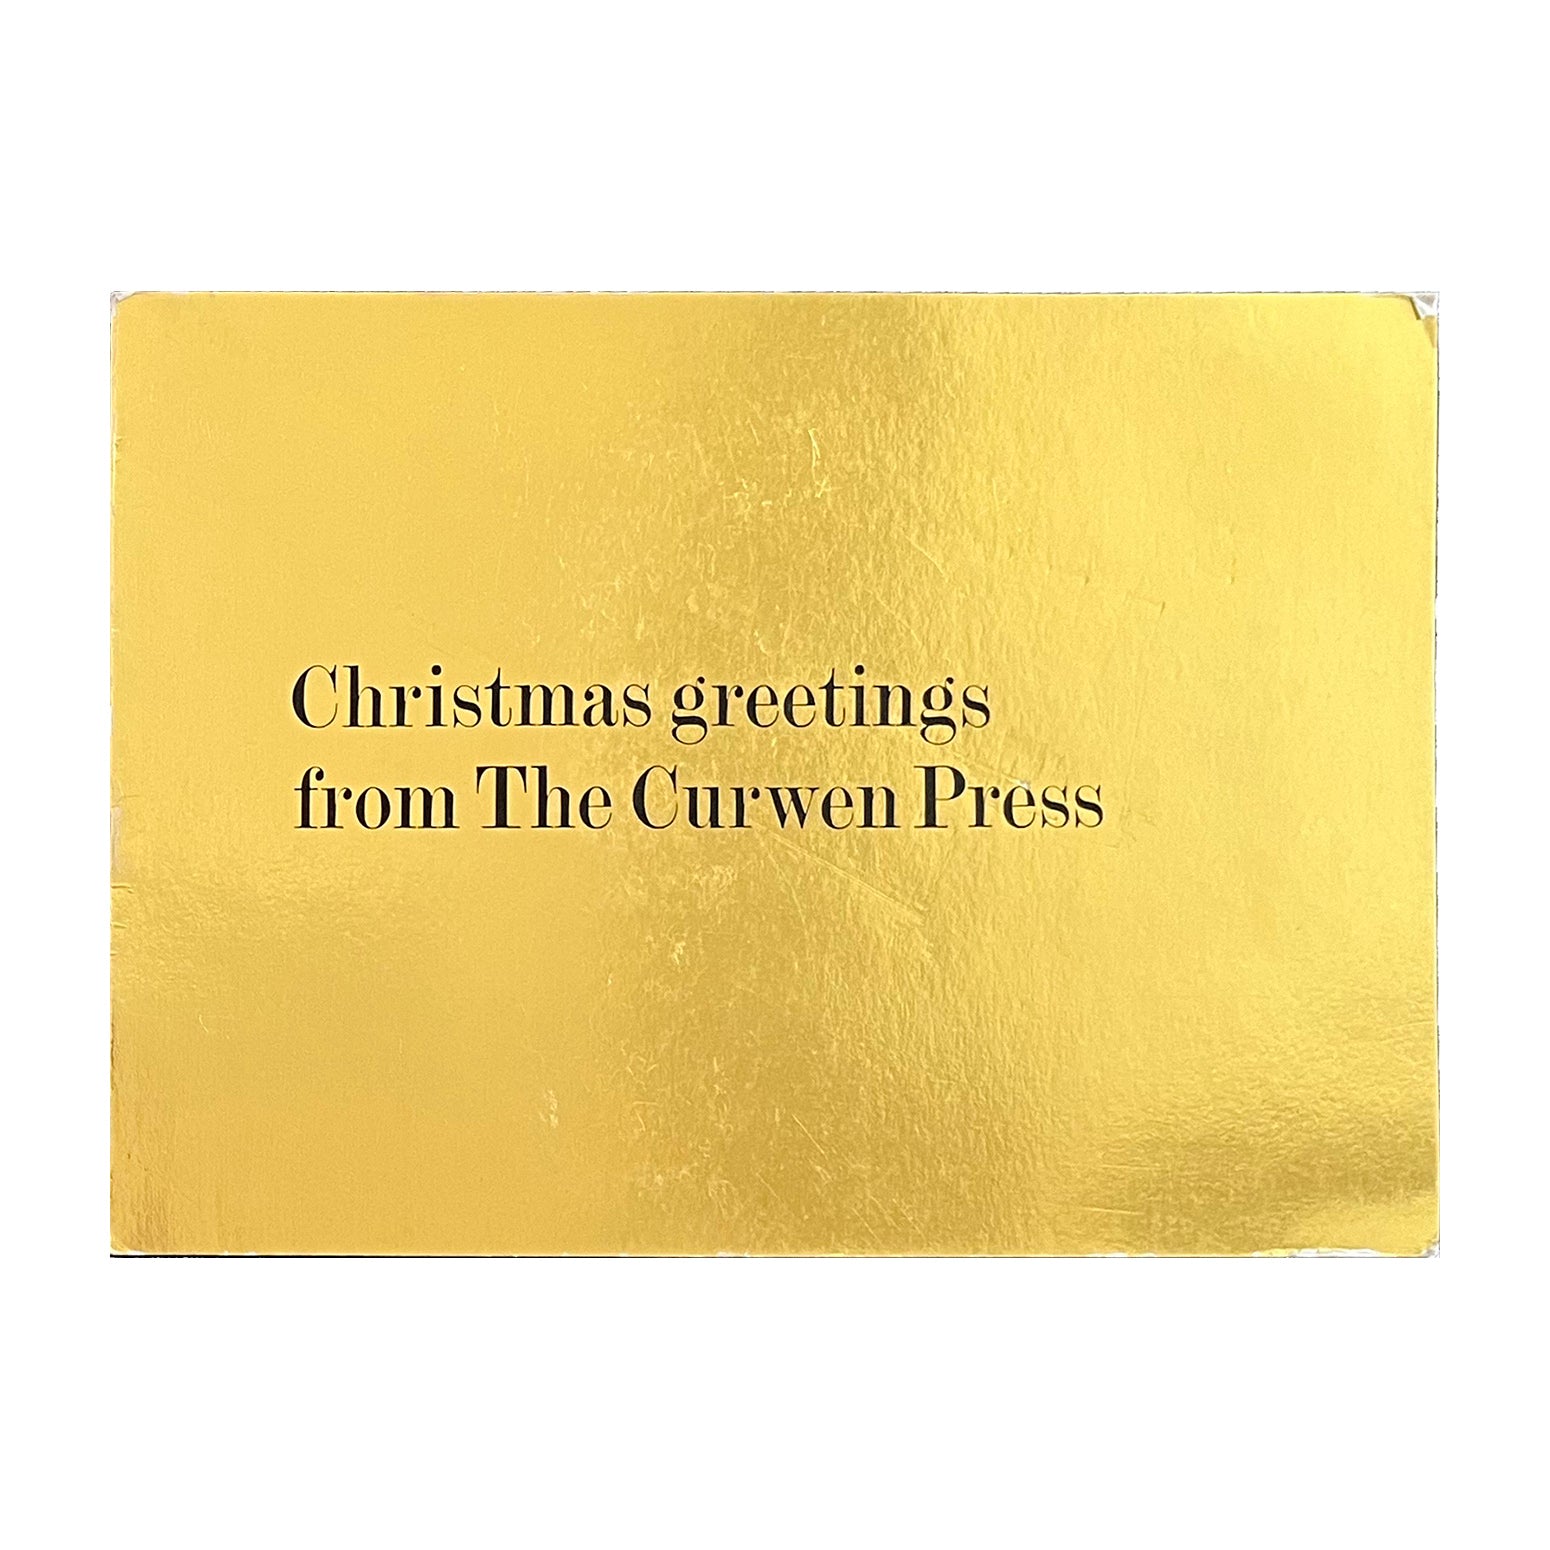 Christmas Card printed and published by the Curwen Press in the early 1970s